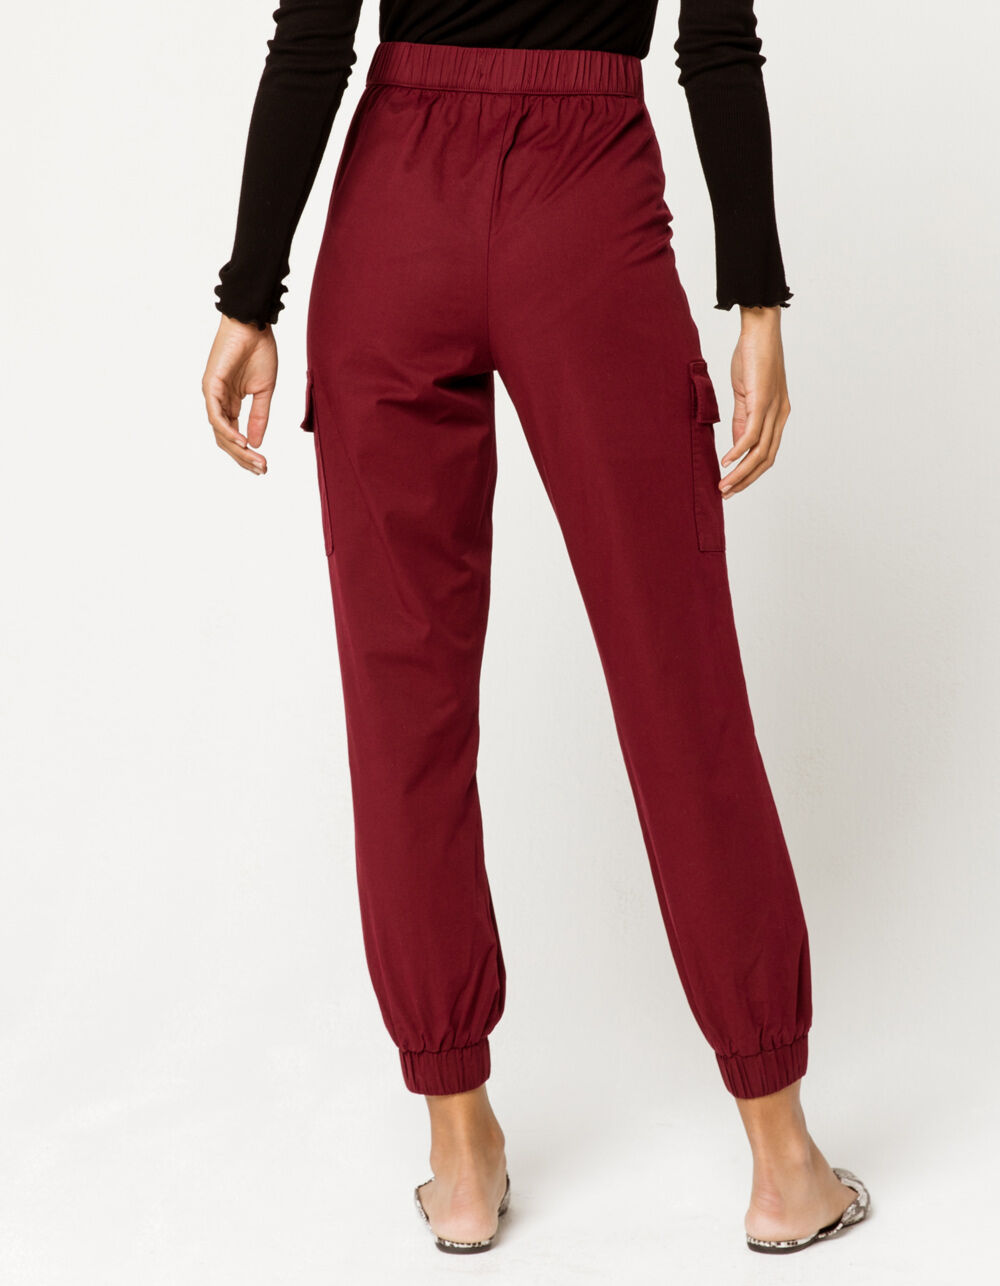 SKY AND SPARROW Cargo Womens Jogger Pants - WINE | Tillys